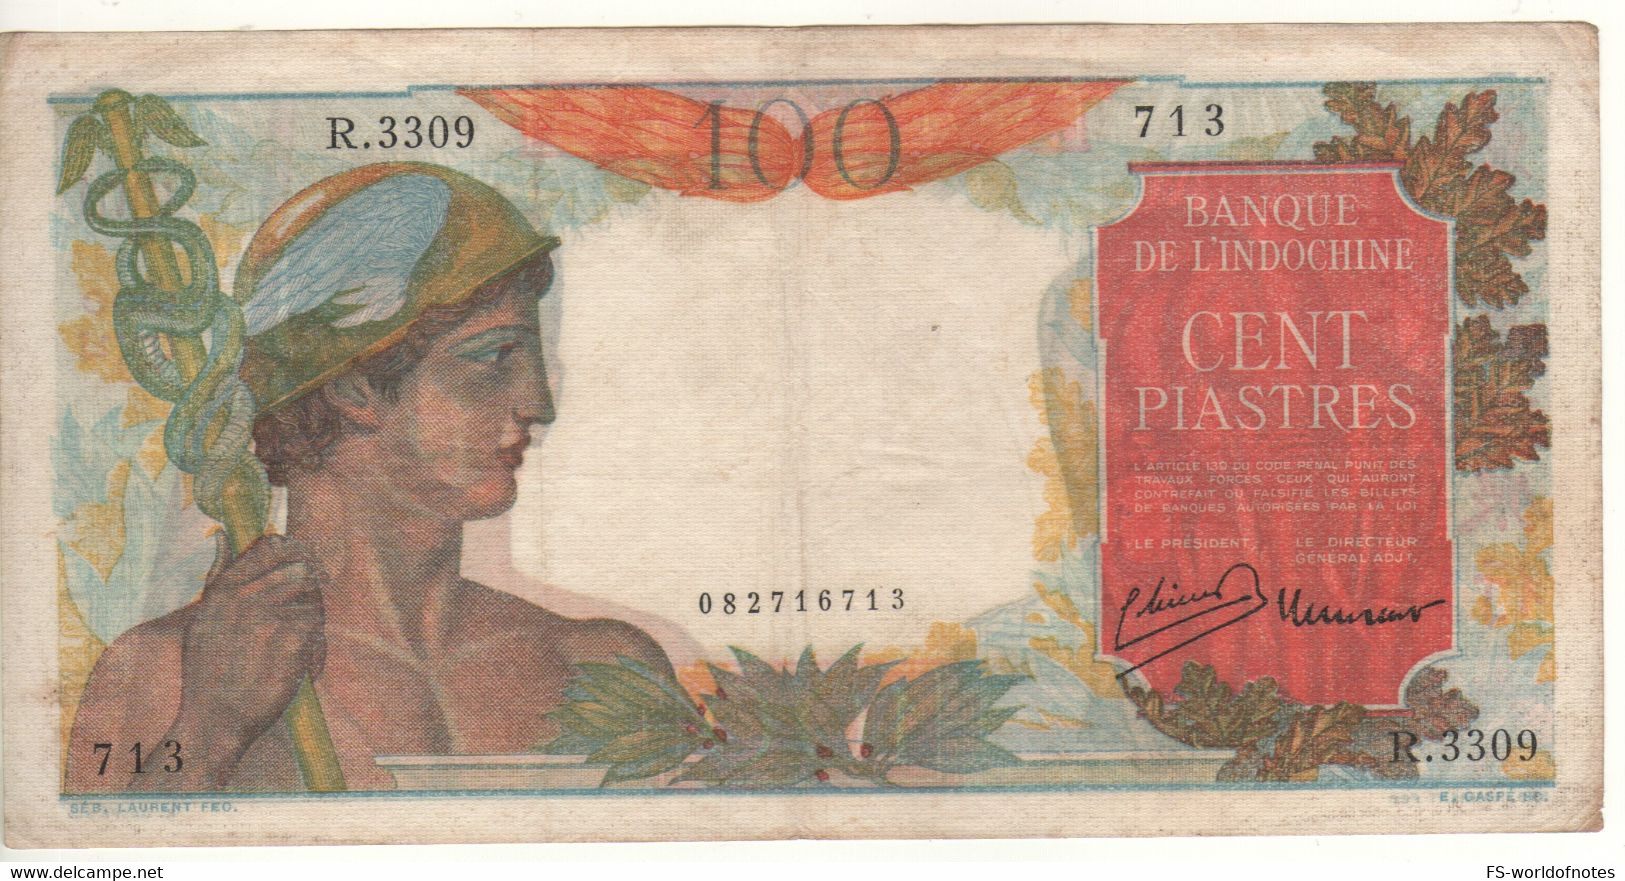 FRENCH INDOCHINA   100  Piastres  / Đồng / Riels / Kip    P82b   ( Mercury At Front + Elephants At Back ) - Indocina